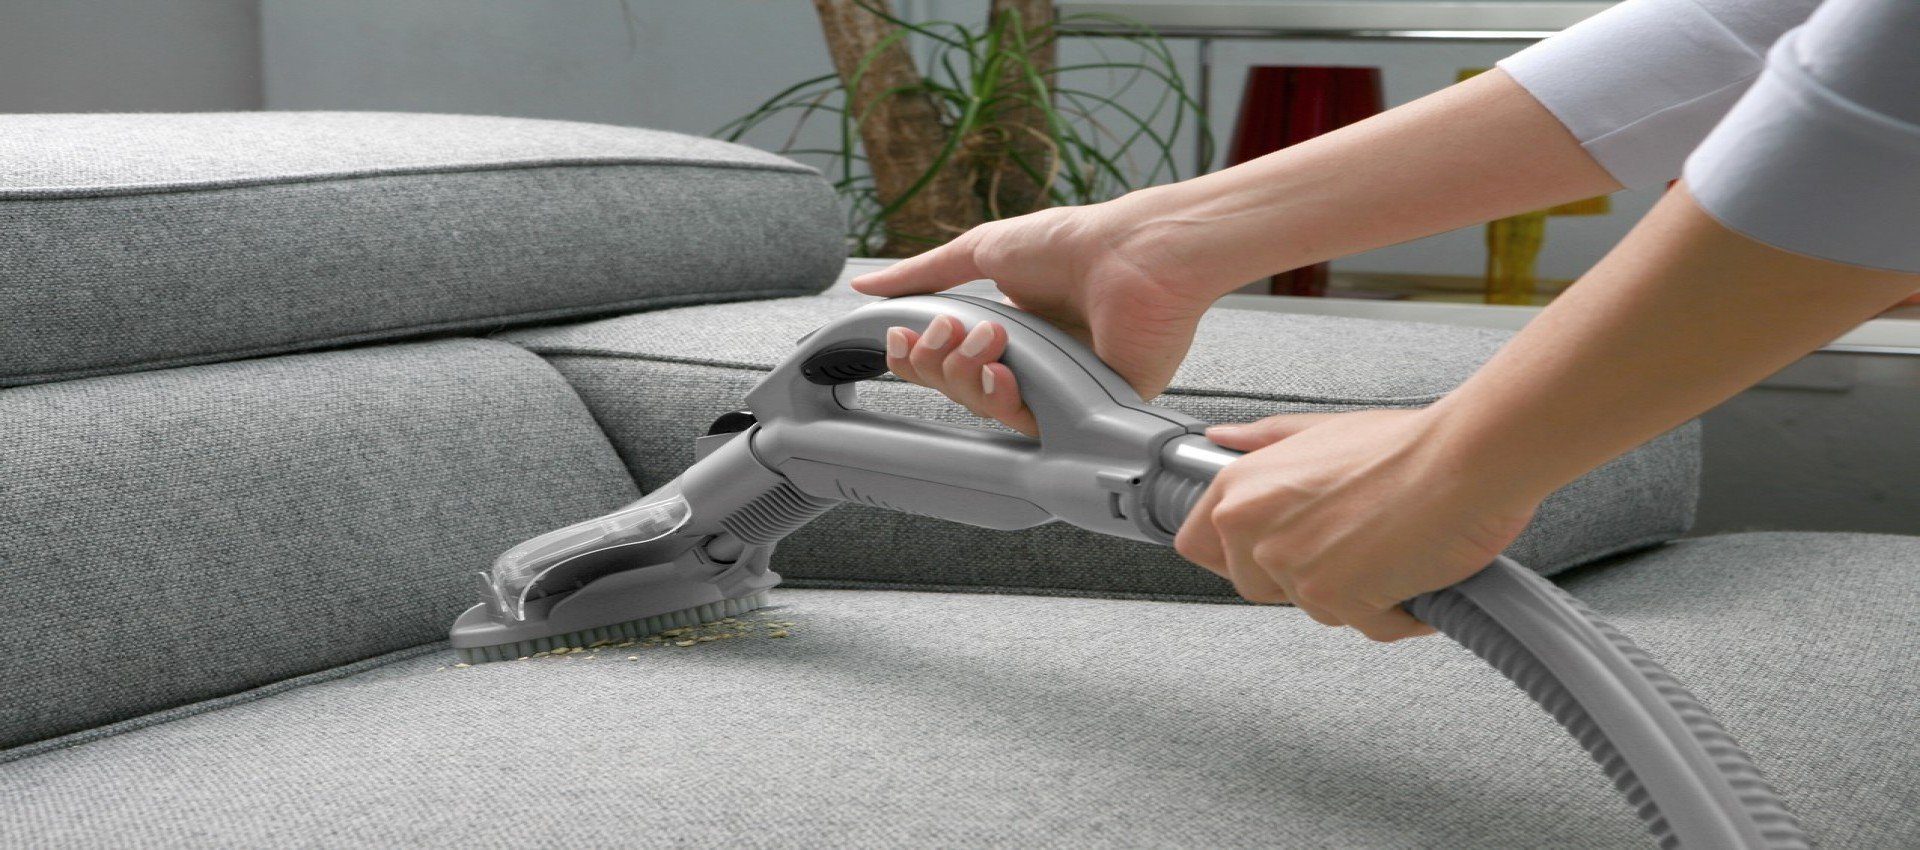 How to steam clean your couch?缩略图